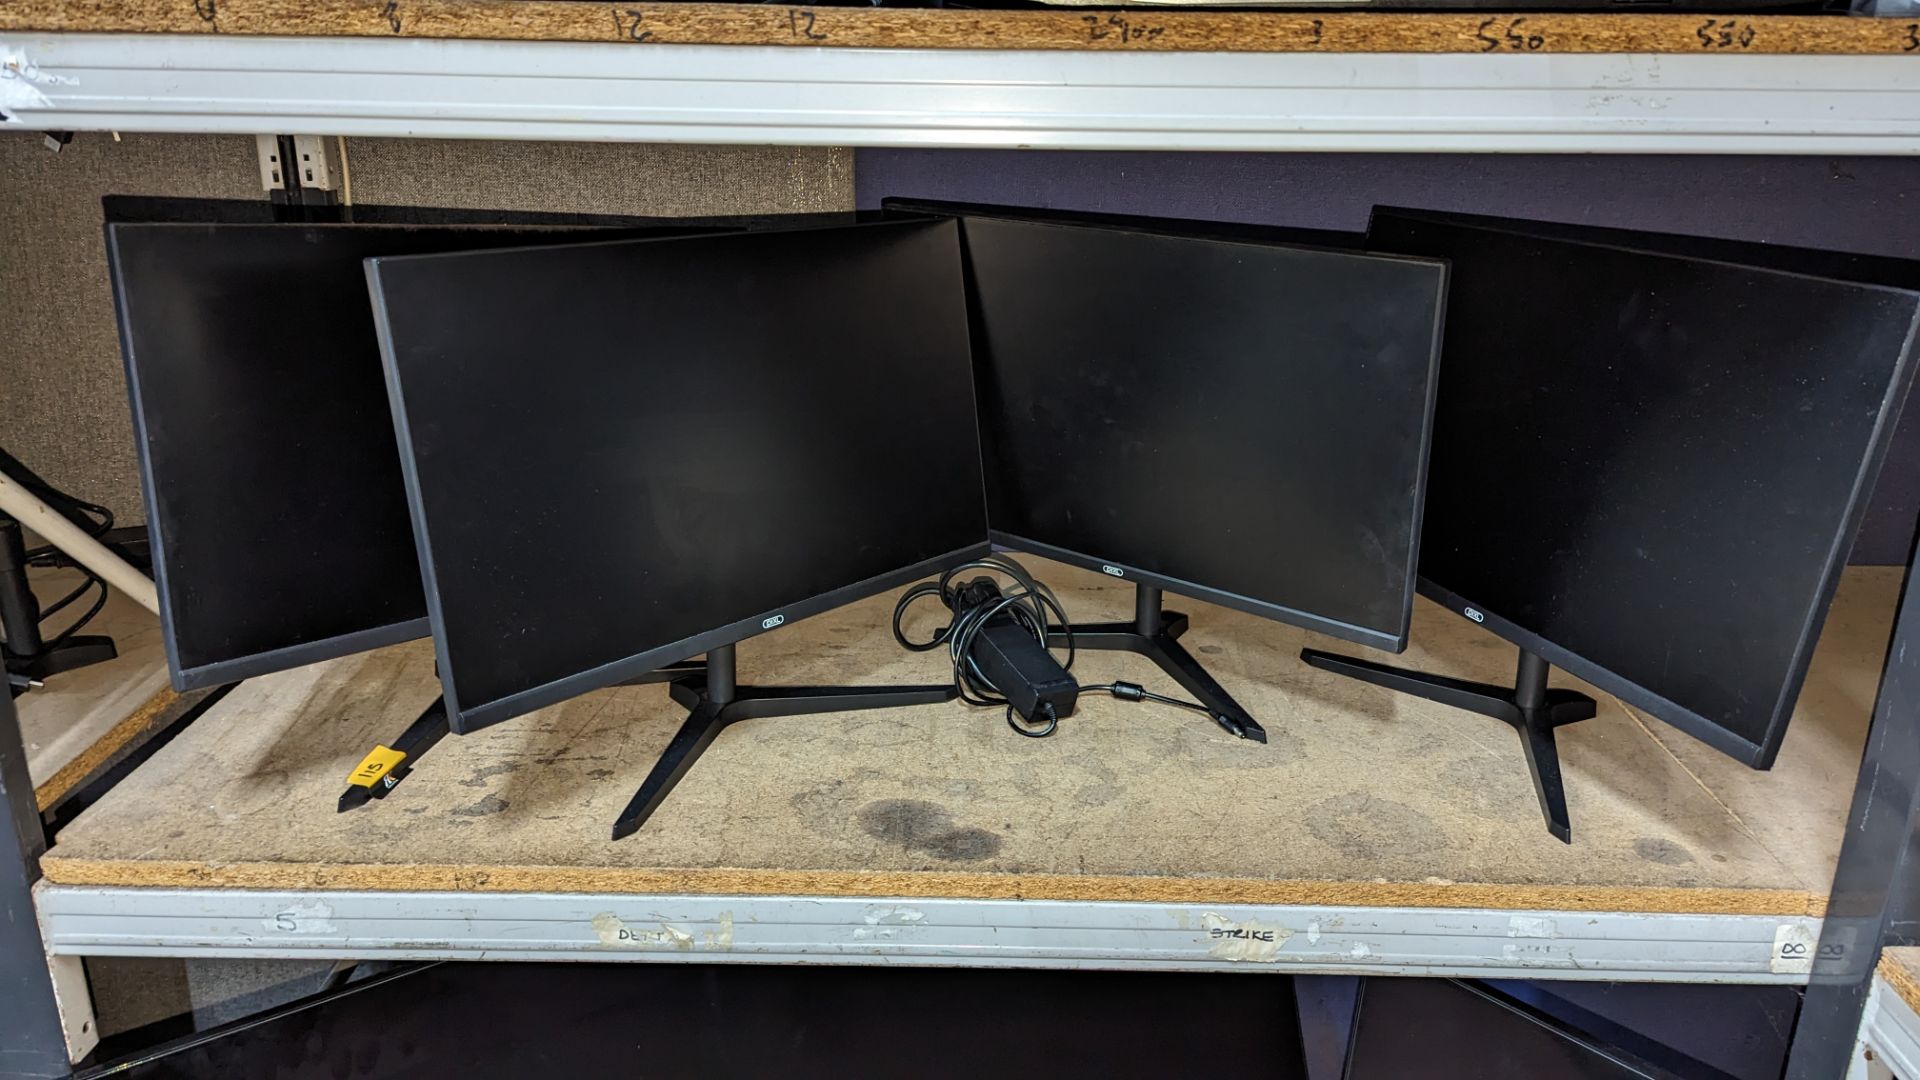 4 off Pixl 23" widescreen monitors. NB: each of these monitors require an external power supply an